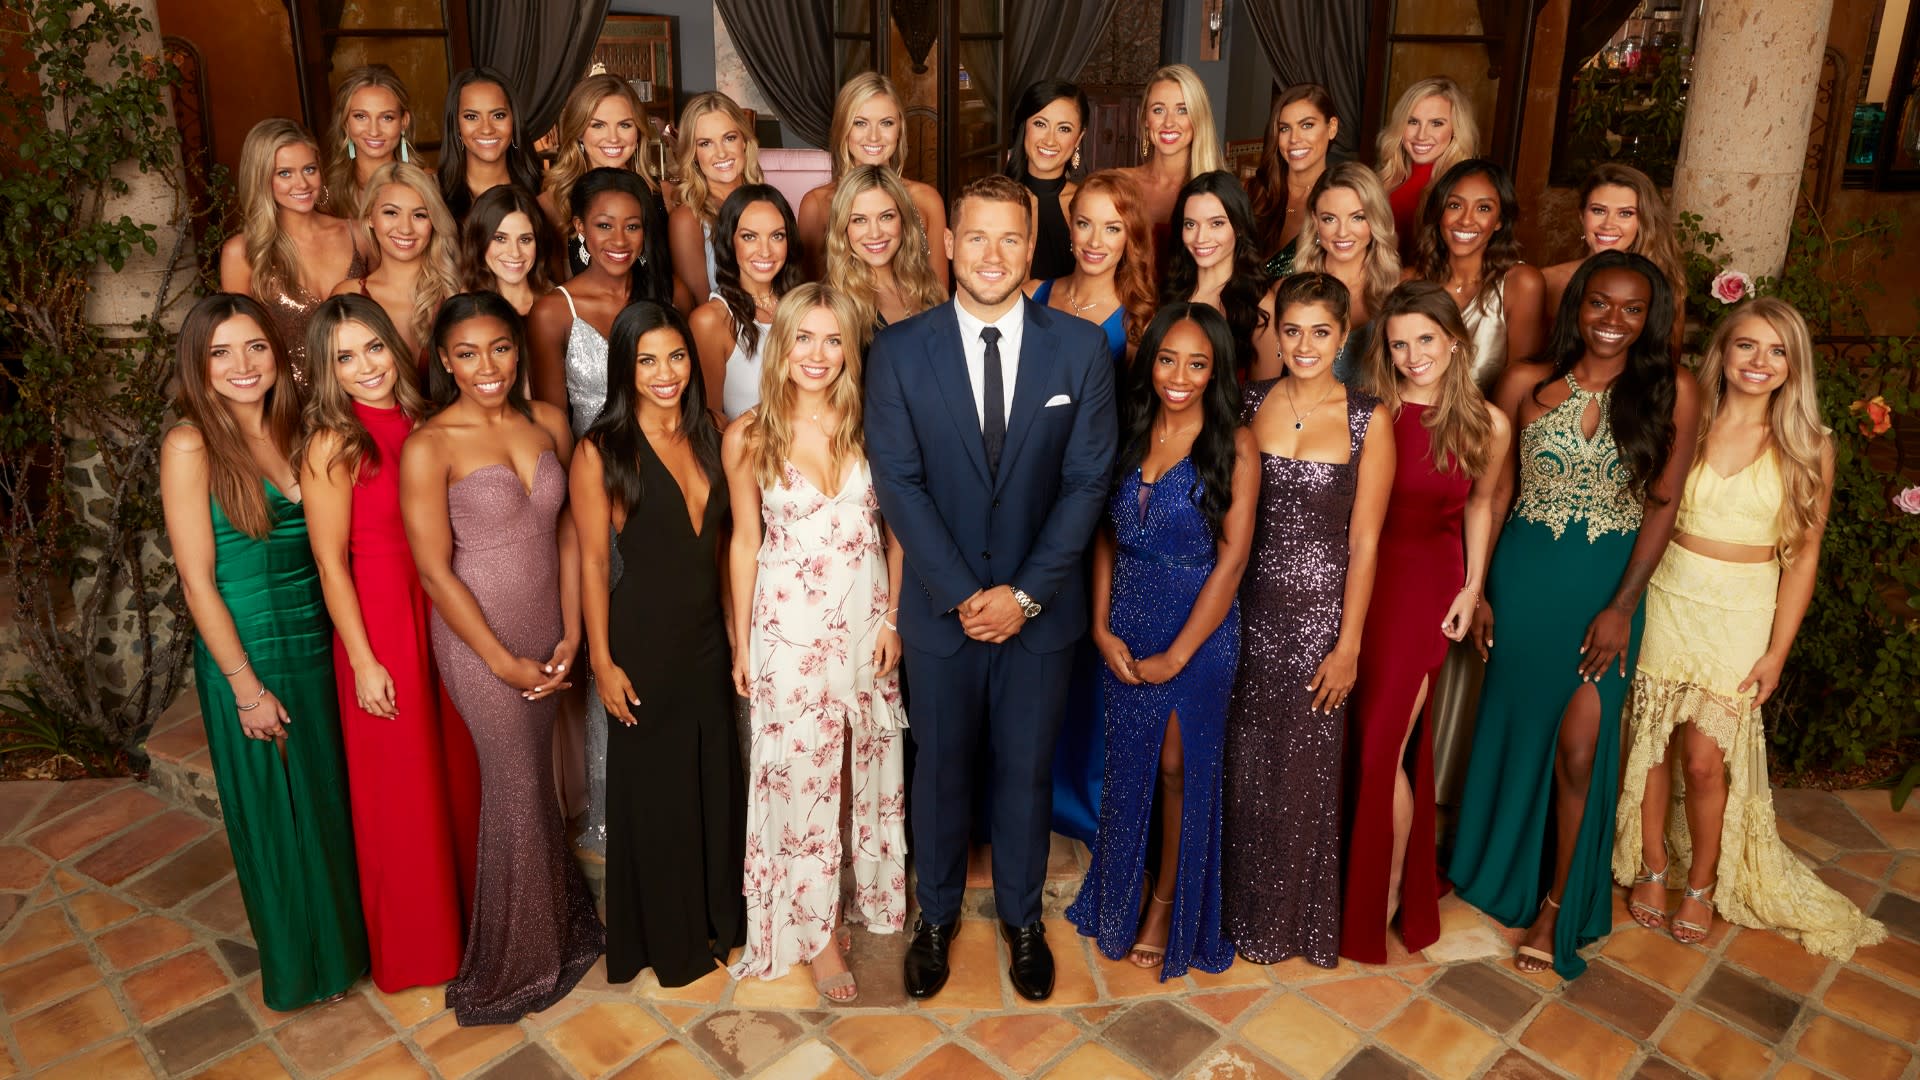 What I Learned From 'The Bachelor' as a FirstTime Viewer